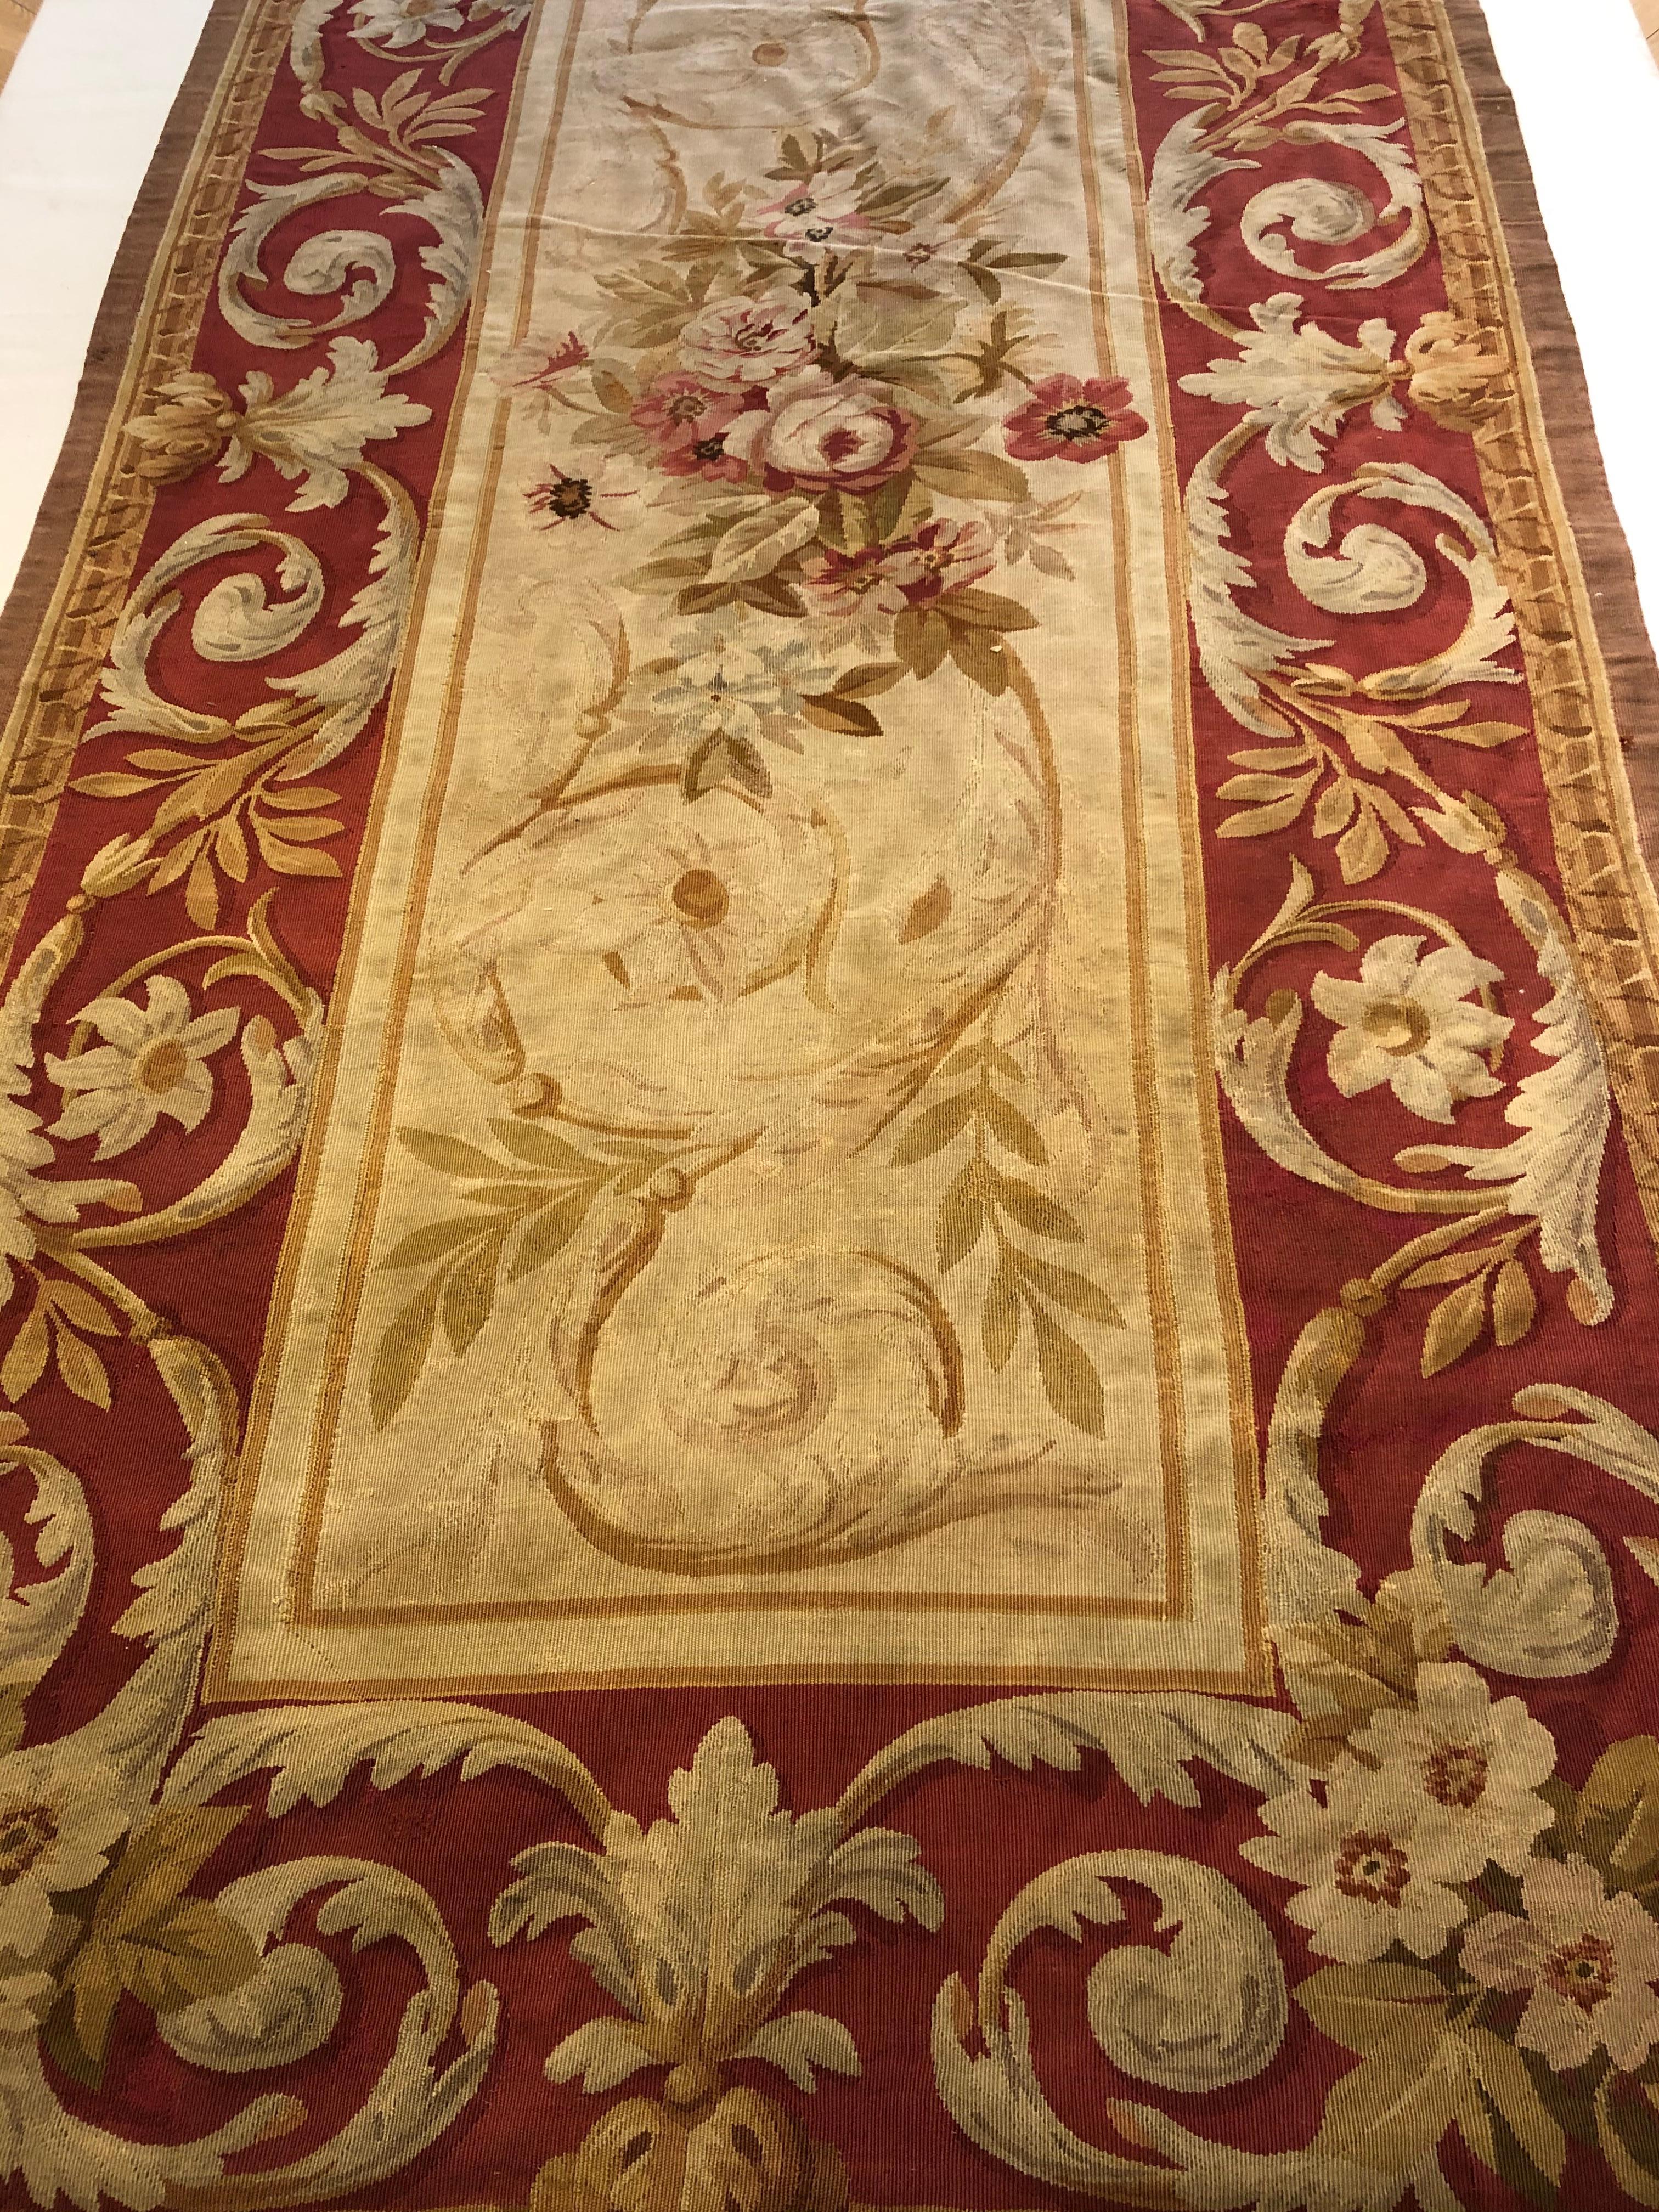 Aubusson French manufacturing is famous for producing wall tapestries and the weaving of splendid floor carpets. Both of these textile products, Semper of high quality, were charged to complete the sumptuous furnishings of villas and palaces of the